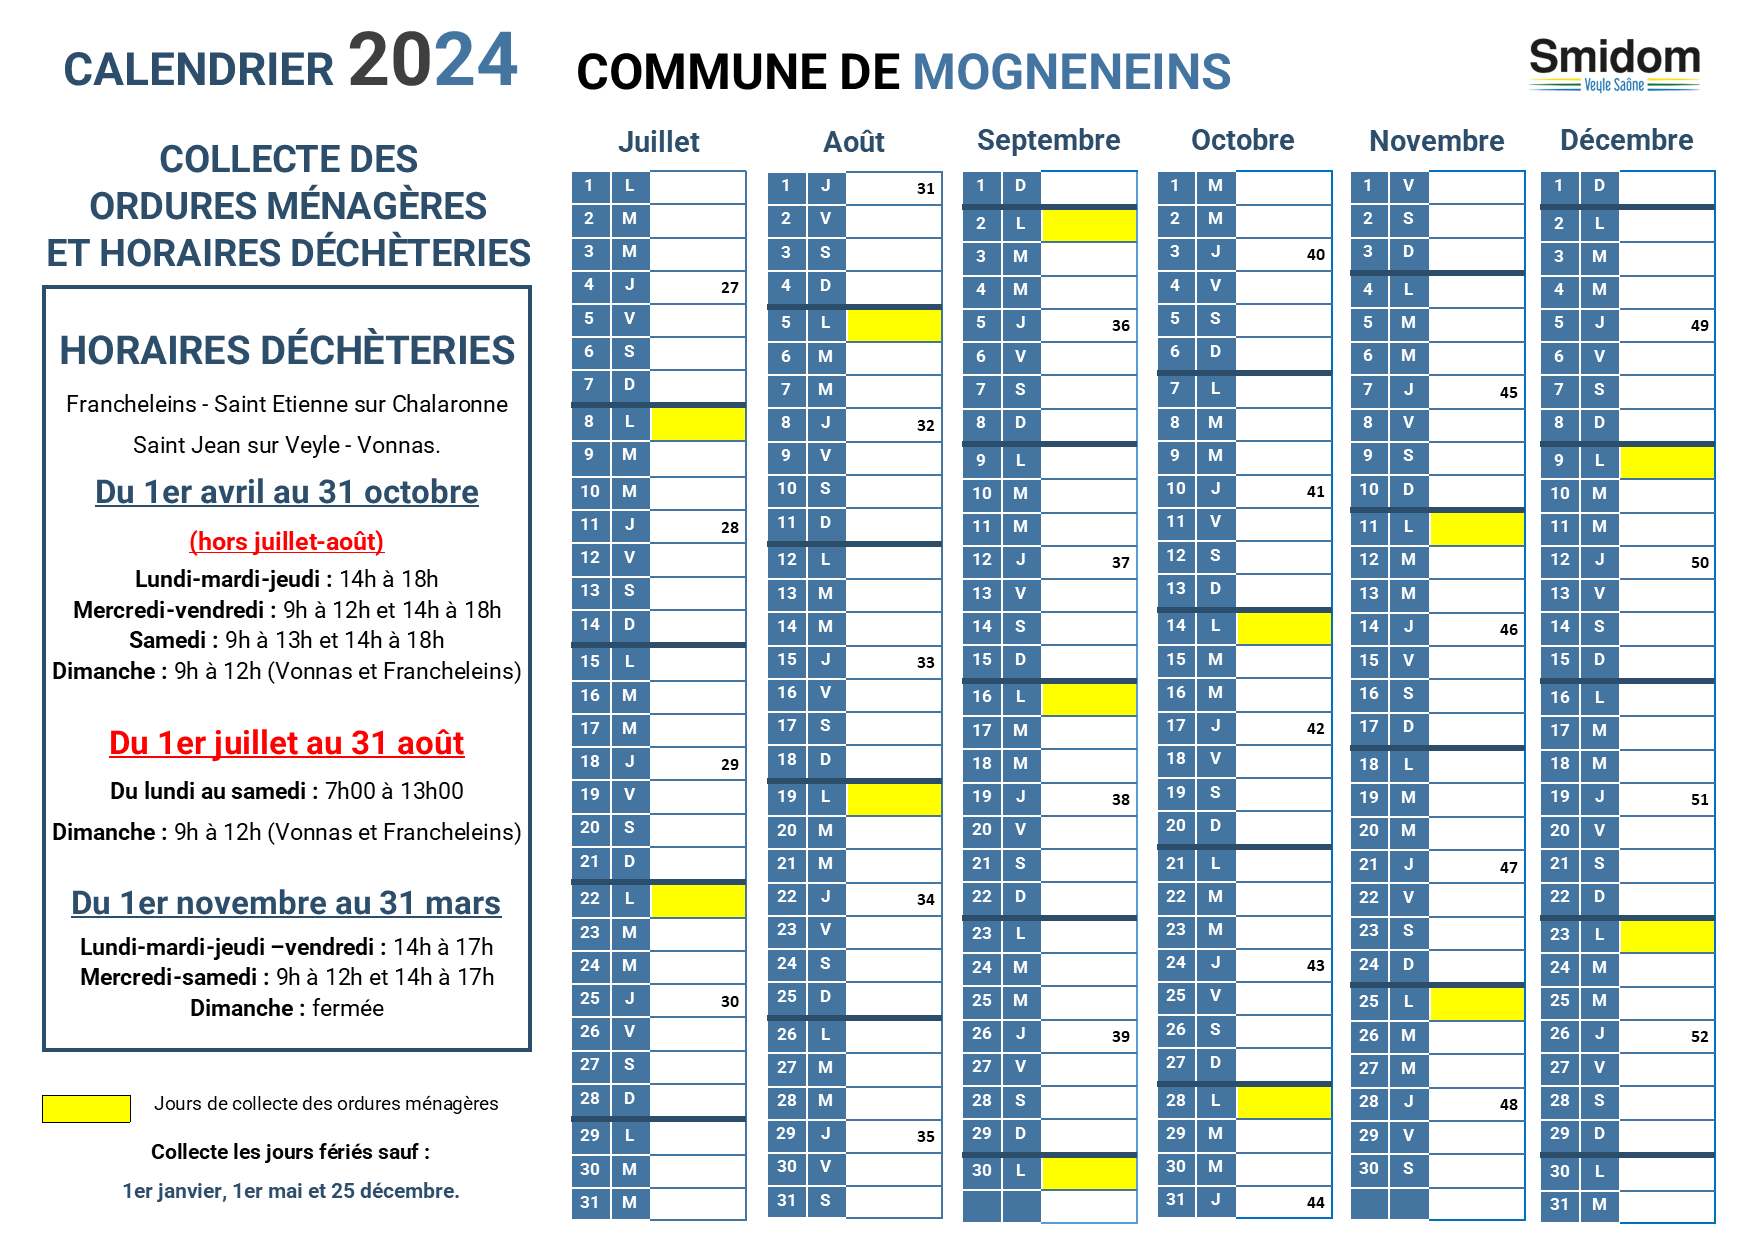 MOGNENEINS - Calendrier 2024 - 2.png